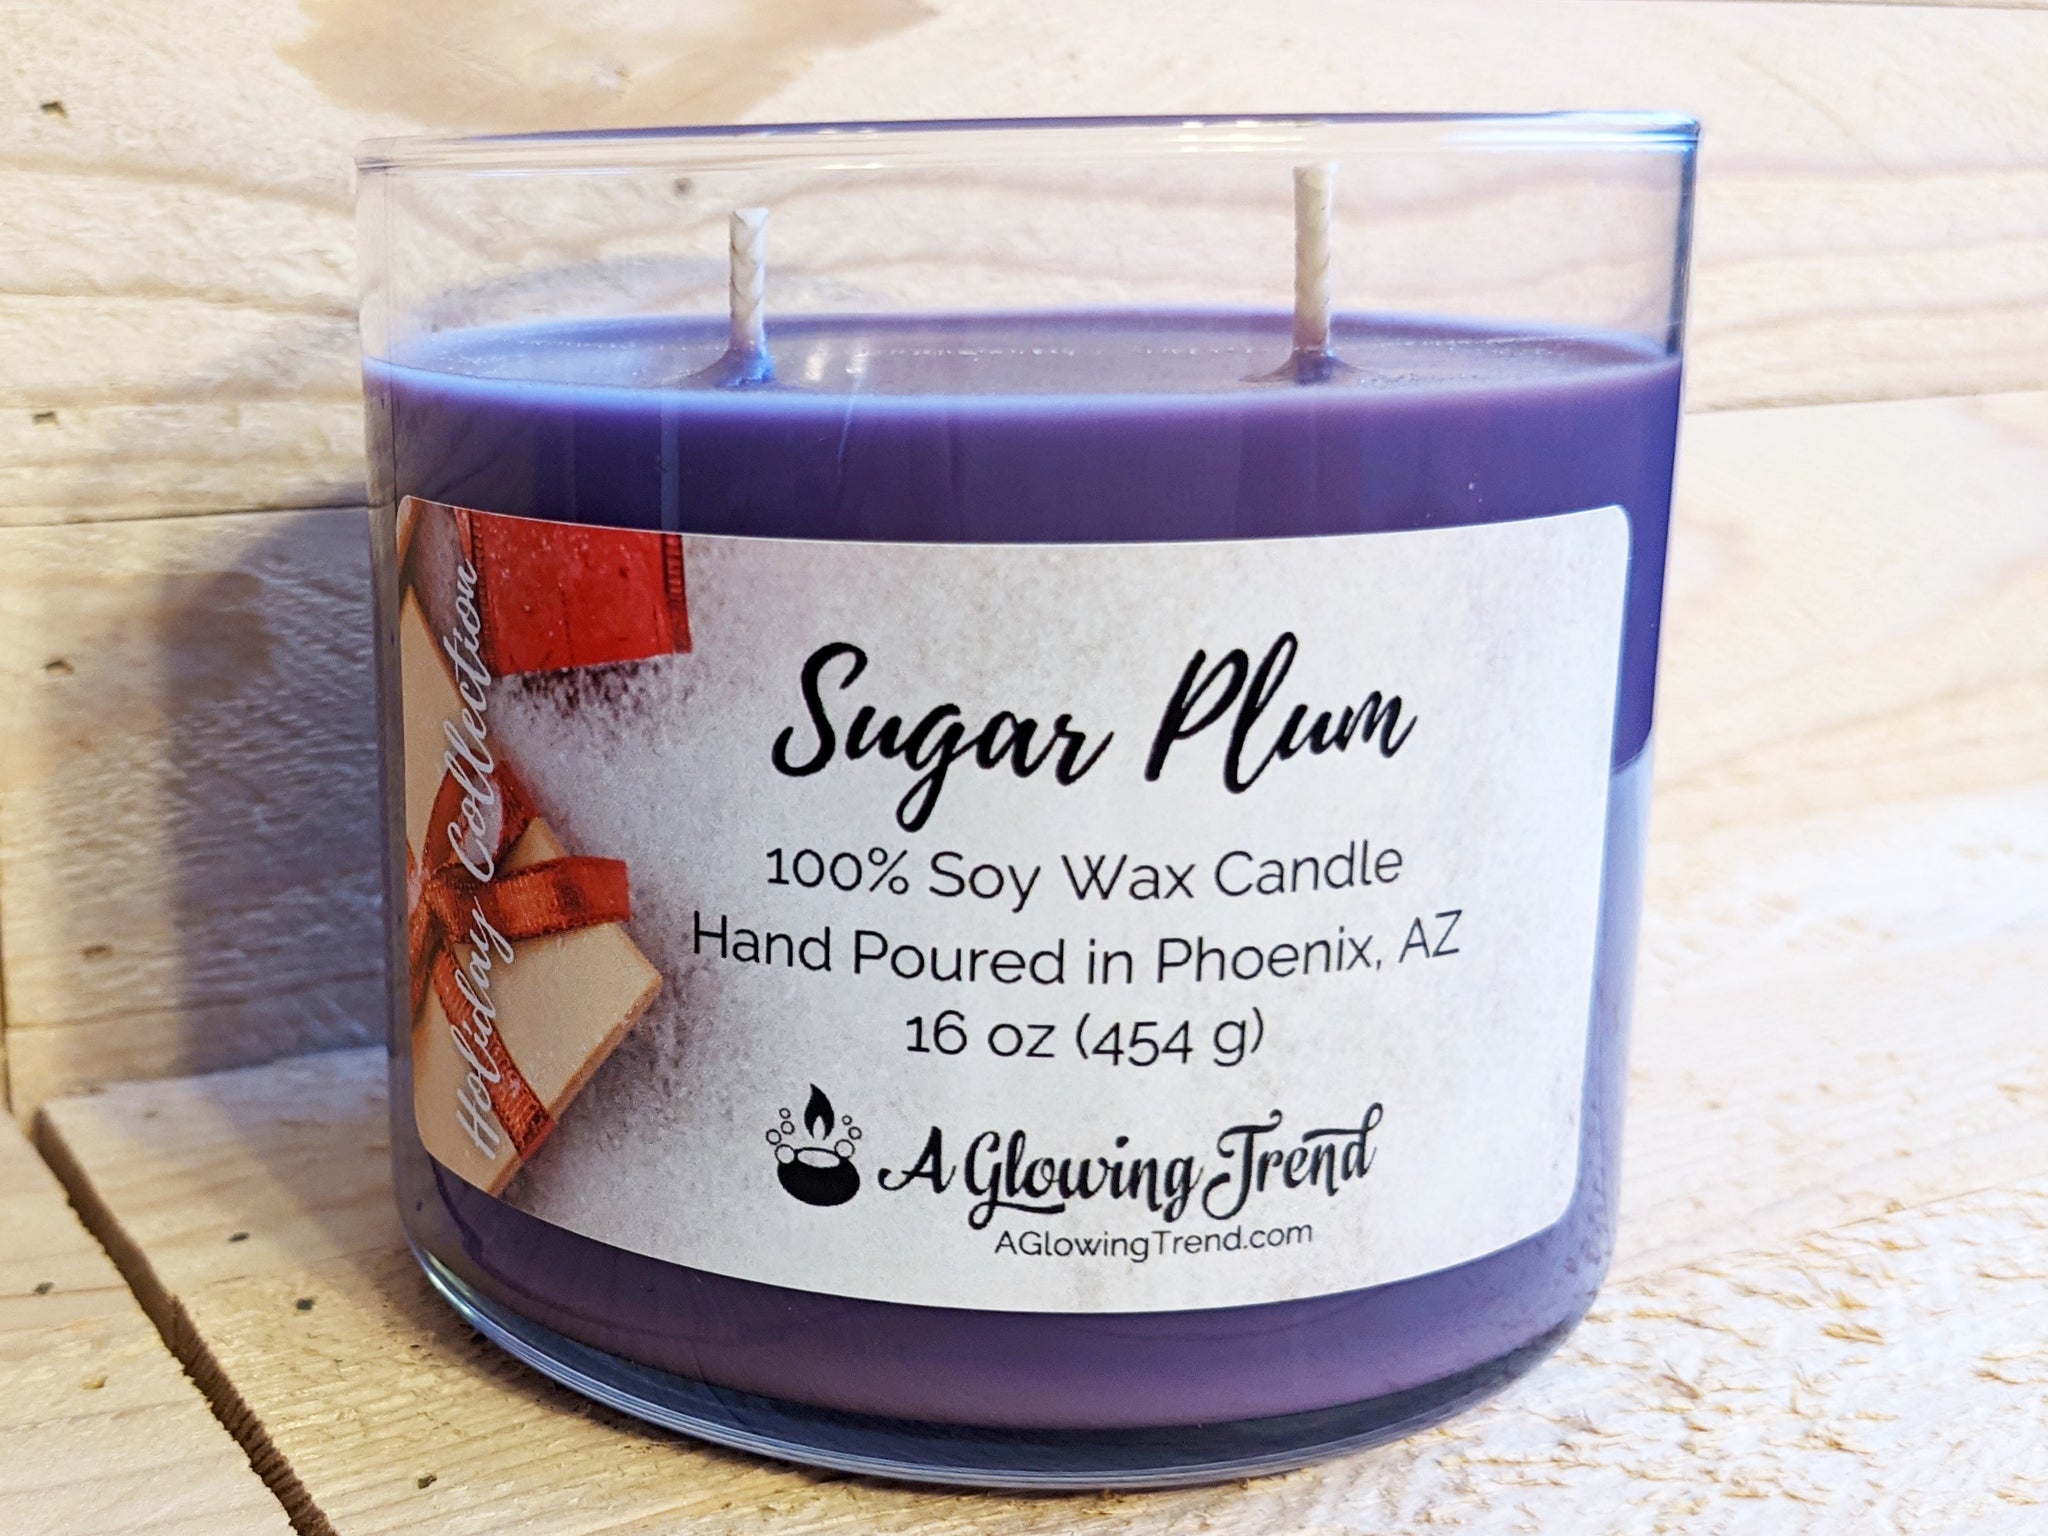 A 16 oz glass tumbler containing a purple Sugar Plum scented soy candle topped with glitter by A Glowing Trend.